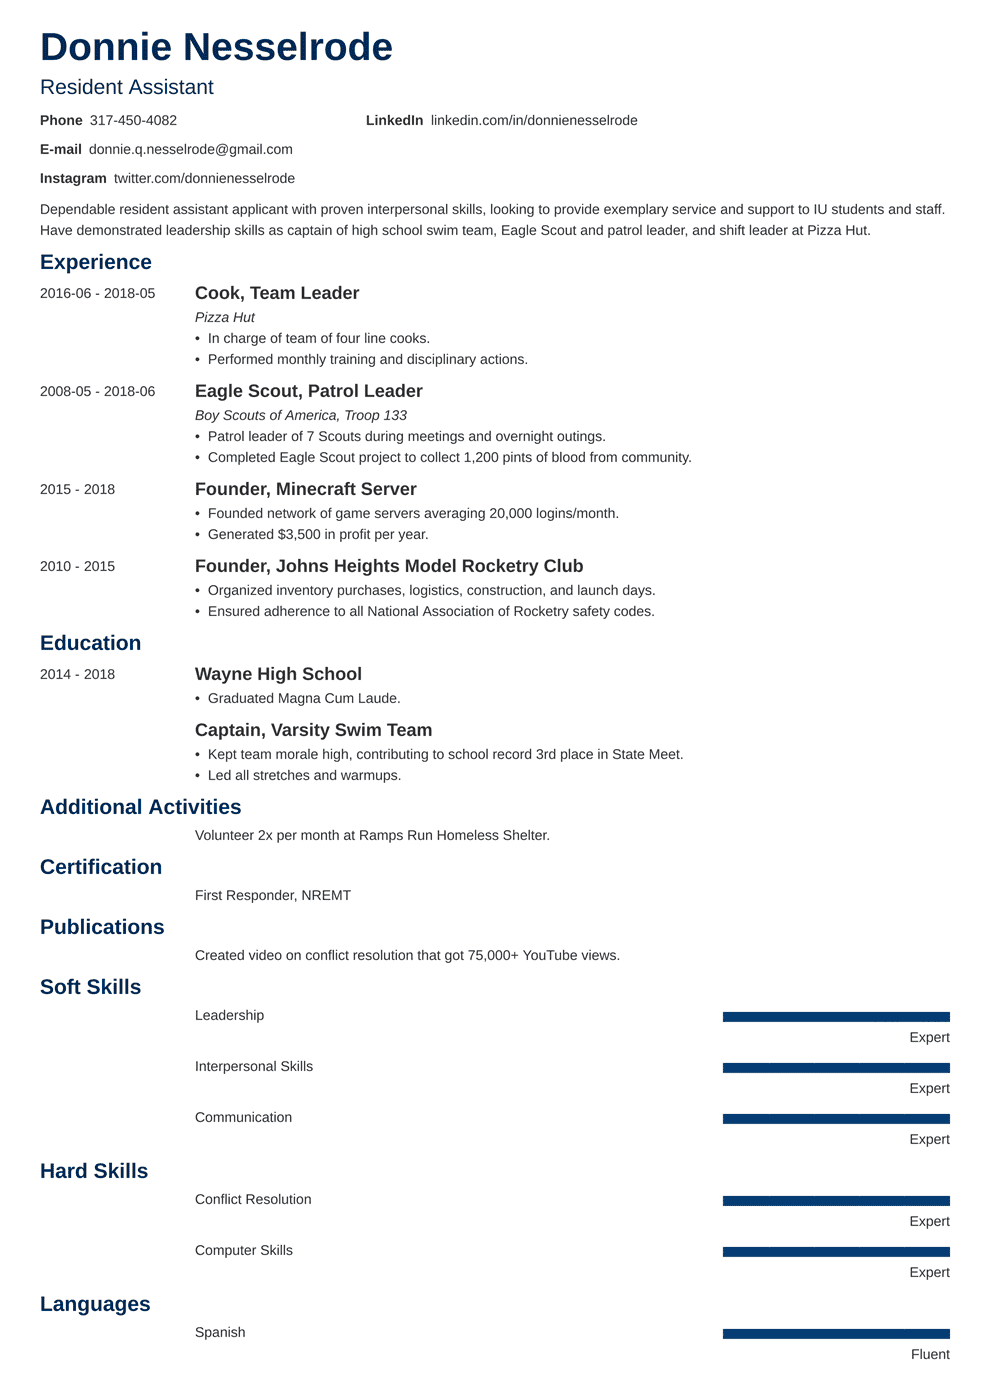 Resident Assistant Cover Letter from cdn-images.zety.com